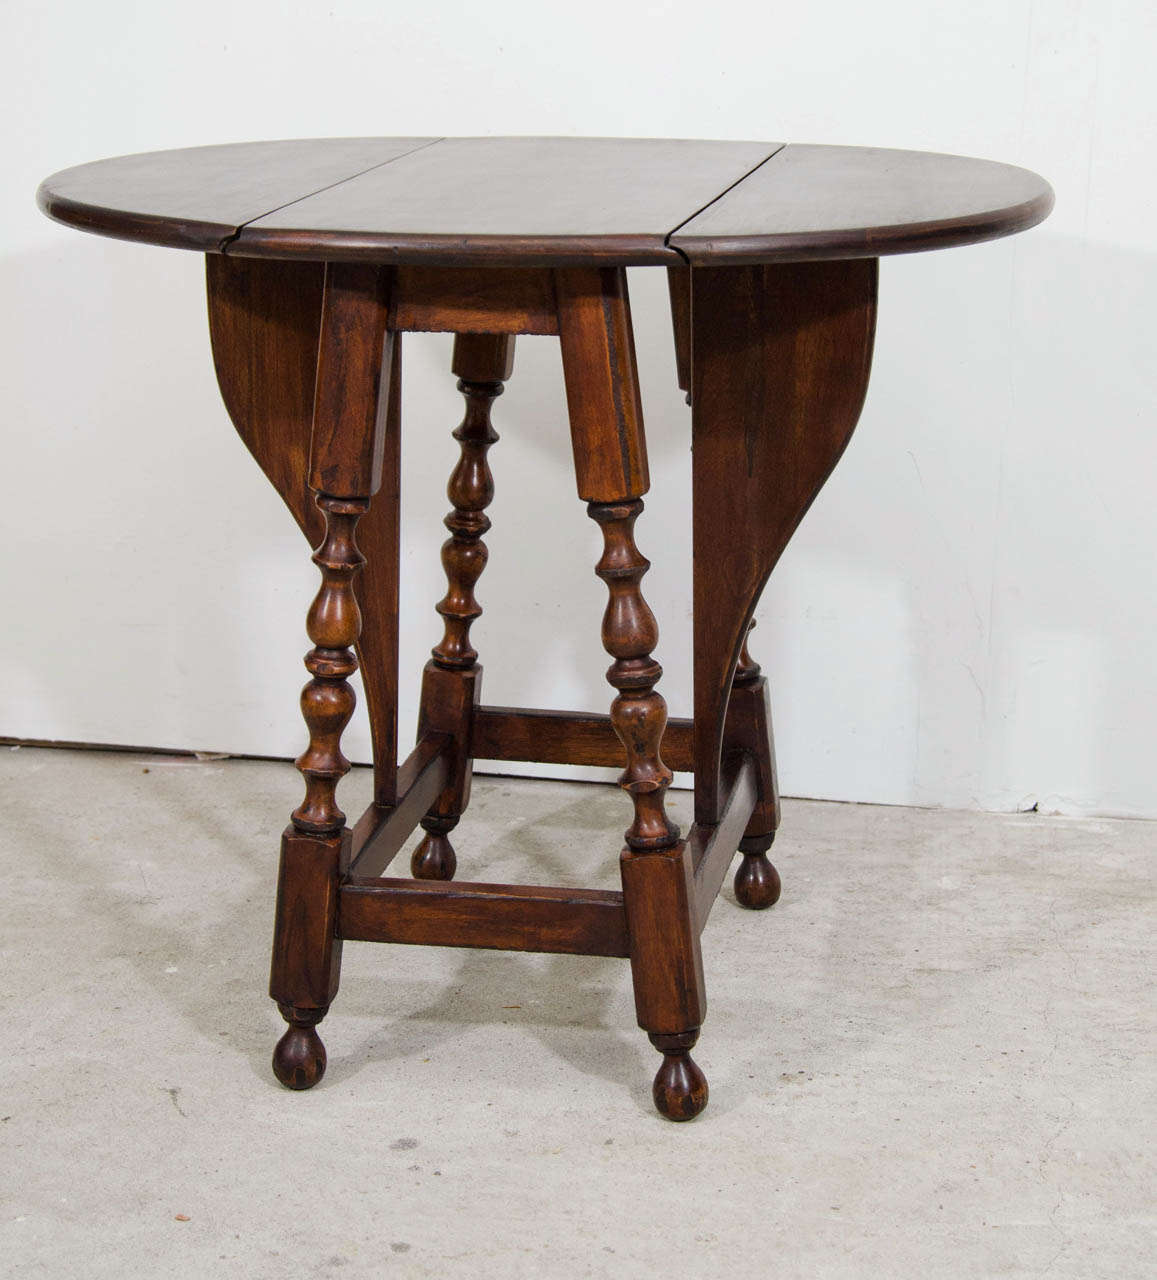 A British solid walnut Butterfly  Oval Drop Leaf Center Table with it's original patina.